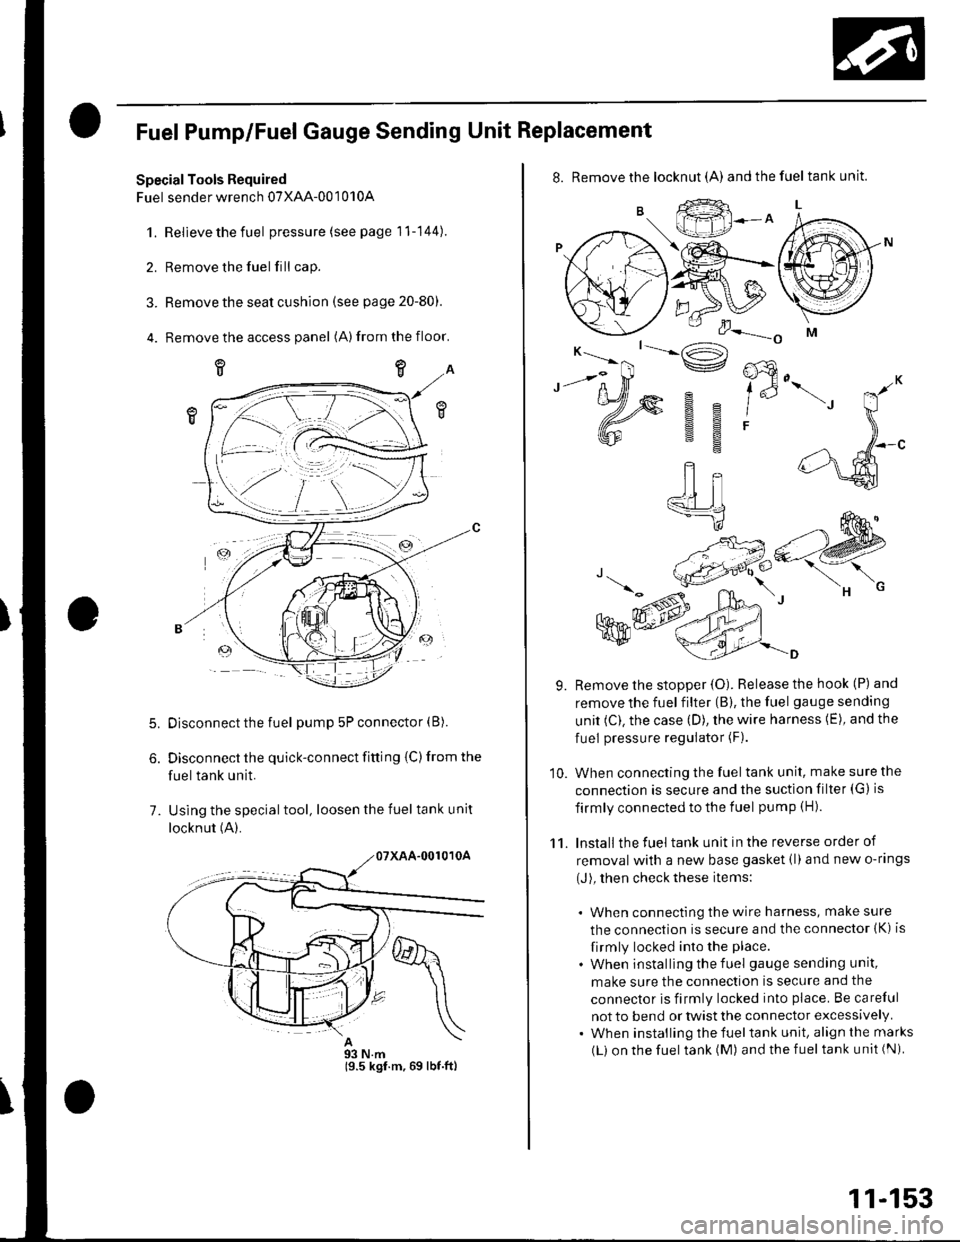 HONDA CIVIC 2003 7.G Workshop Manual Fuel Pump/Fuel Gauge Sending Unit Replacement
SpecialTools Required
Fuel sender wrench 07XAA-001010A
1.Relieve the fuel pressure (see page 11-144).
Remove the fuel fill cap.
Remove the seat cushion (s